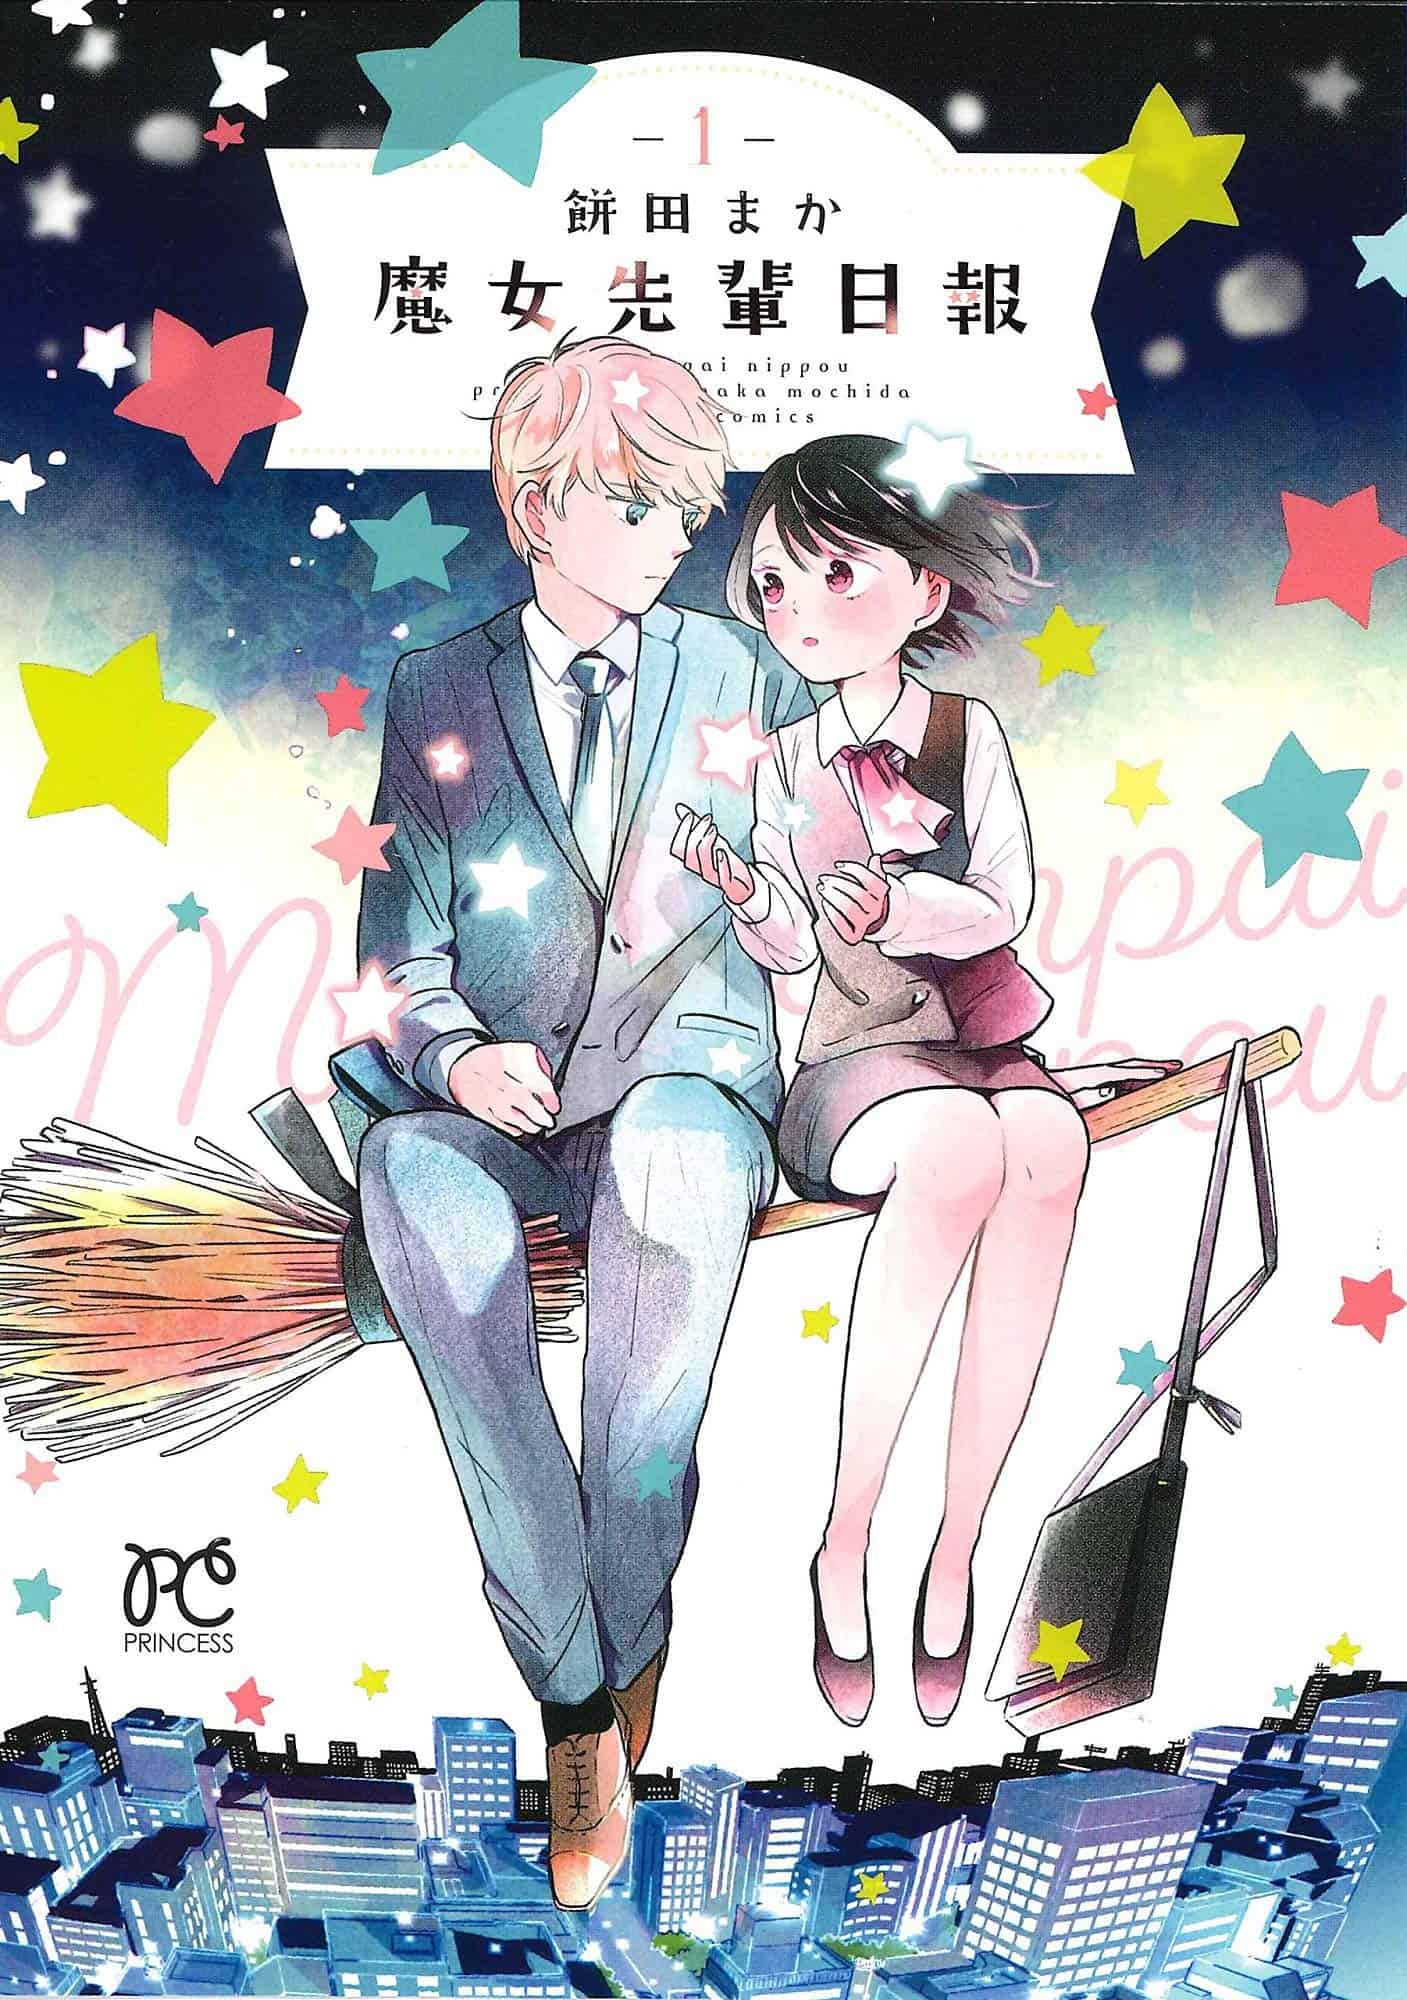 Seven Seas's Harukana Receive Vol 3 Manga for only 5.39 at The